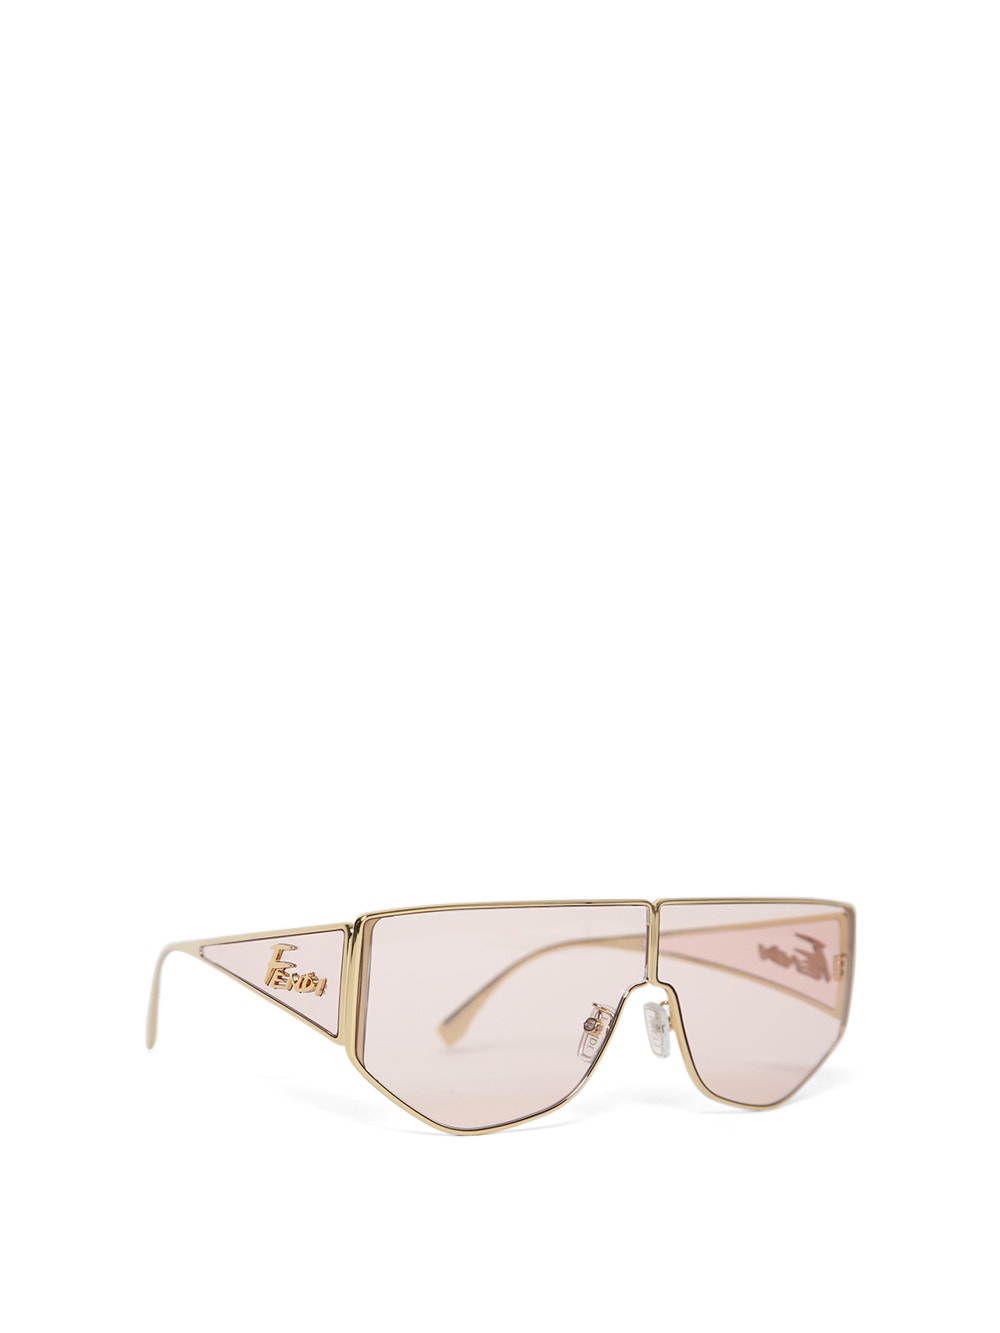 Sunglasses | The Webster